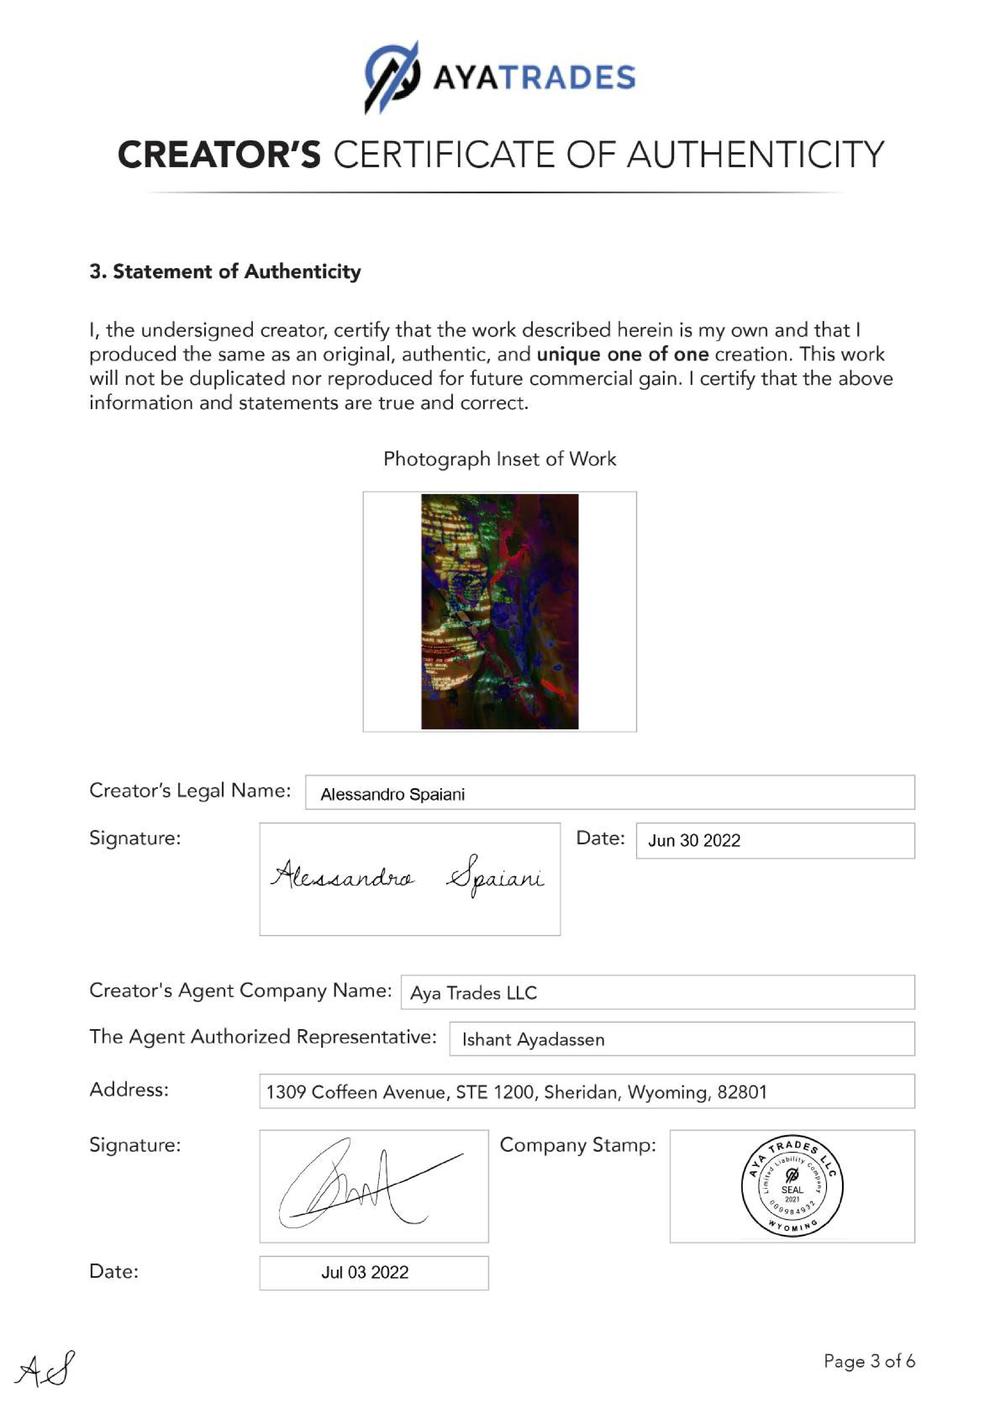 Certificate of Authenticity and Consignment - An Unexpected Encounter